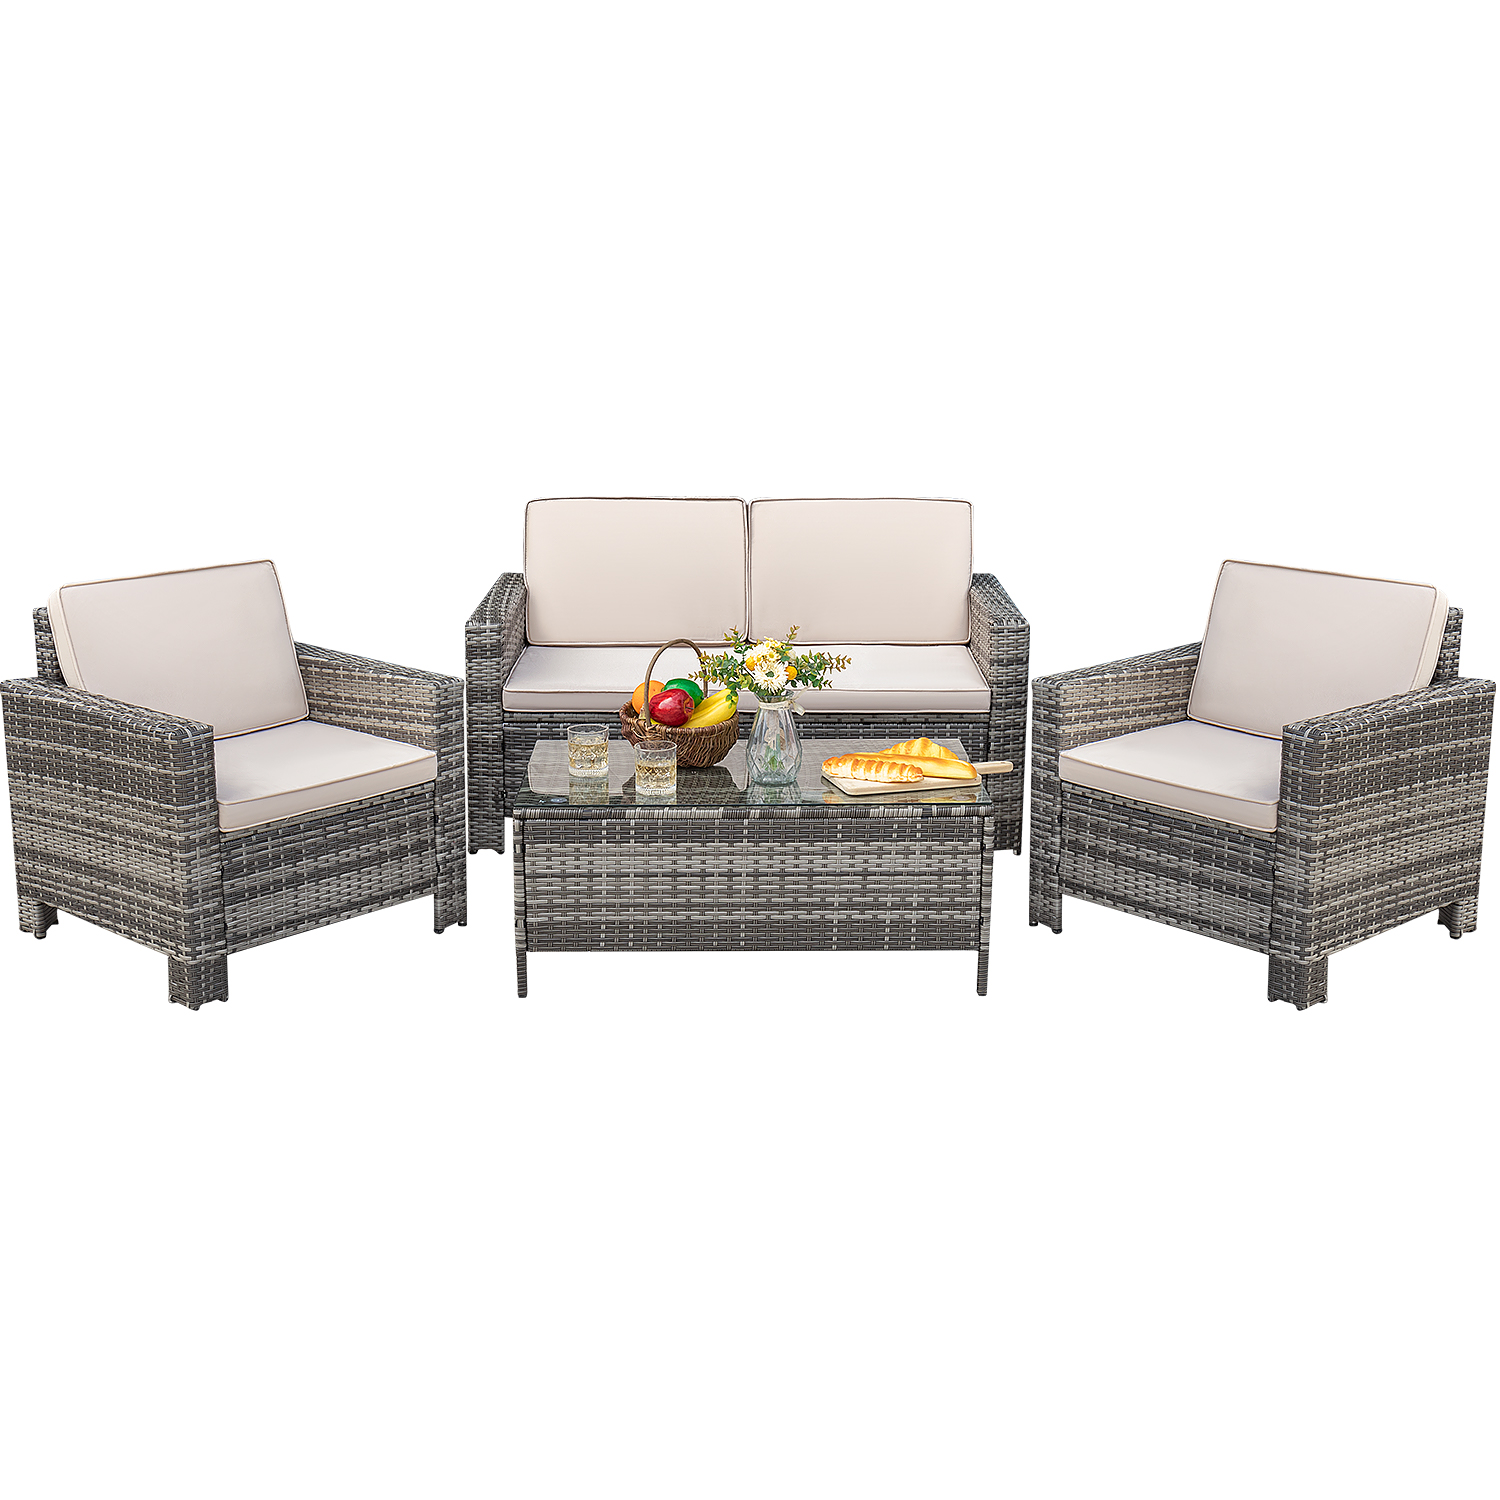 Lacoo 4 Pieces Outdoor Wicker Patio Conversation Set with Cushions, Gray/Beige - image 4 of 6